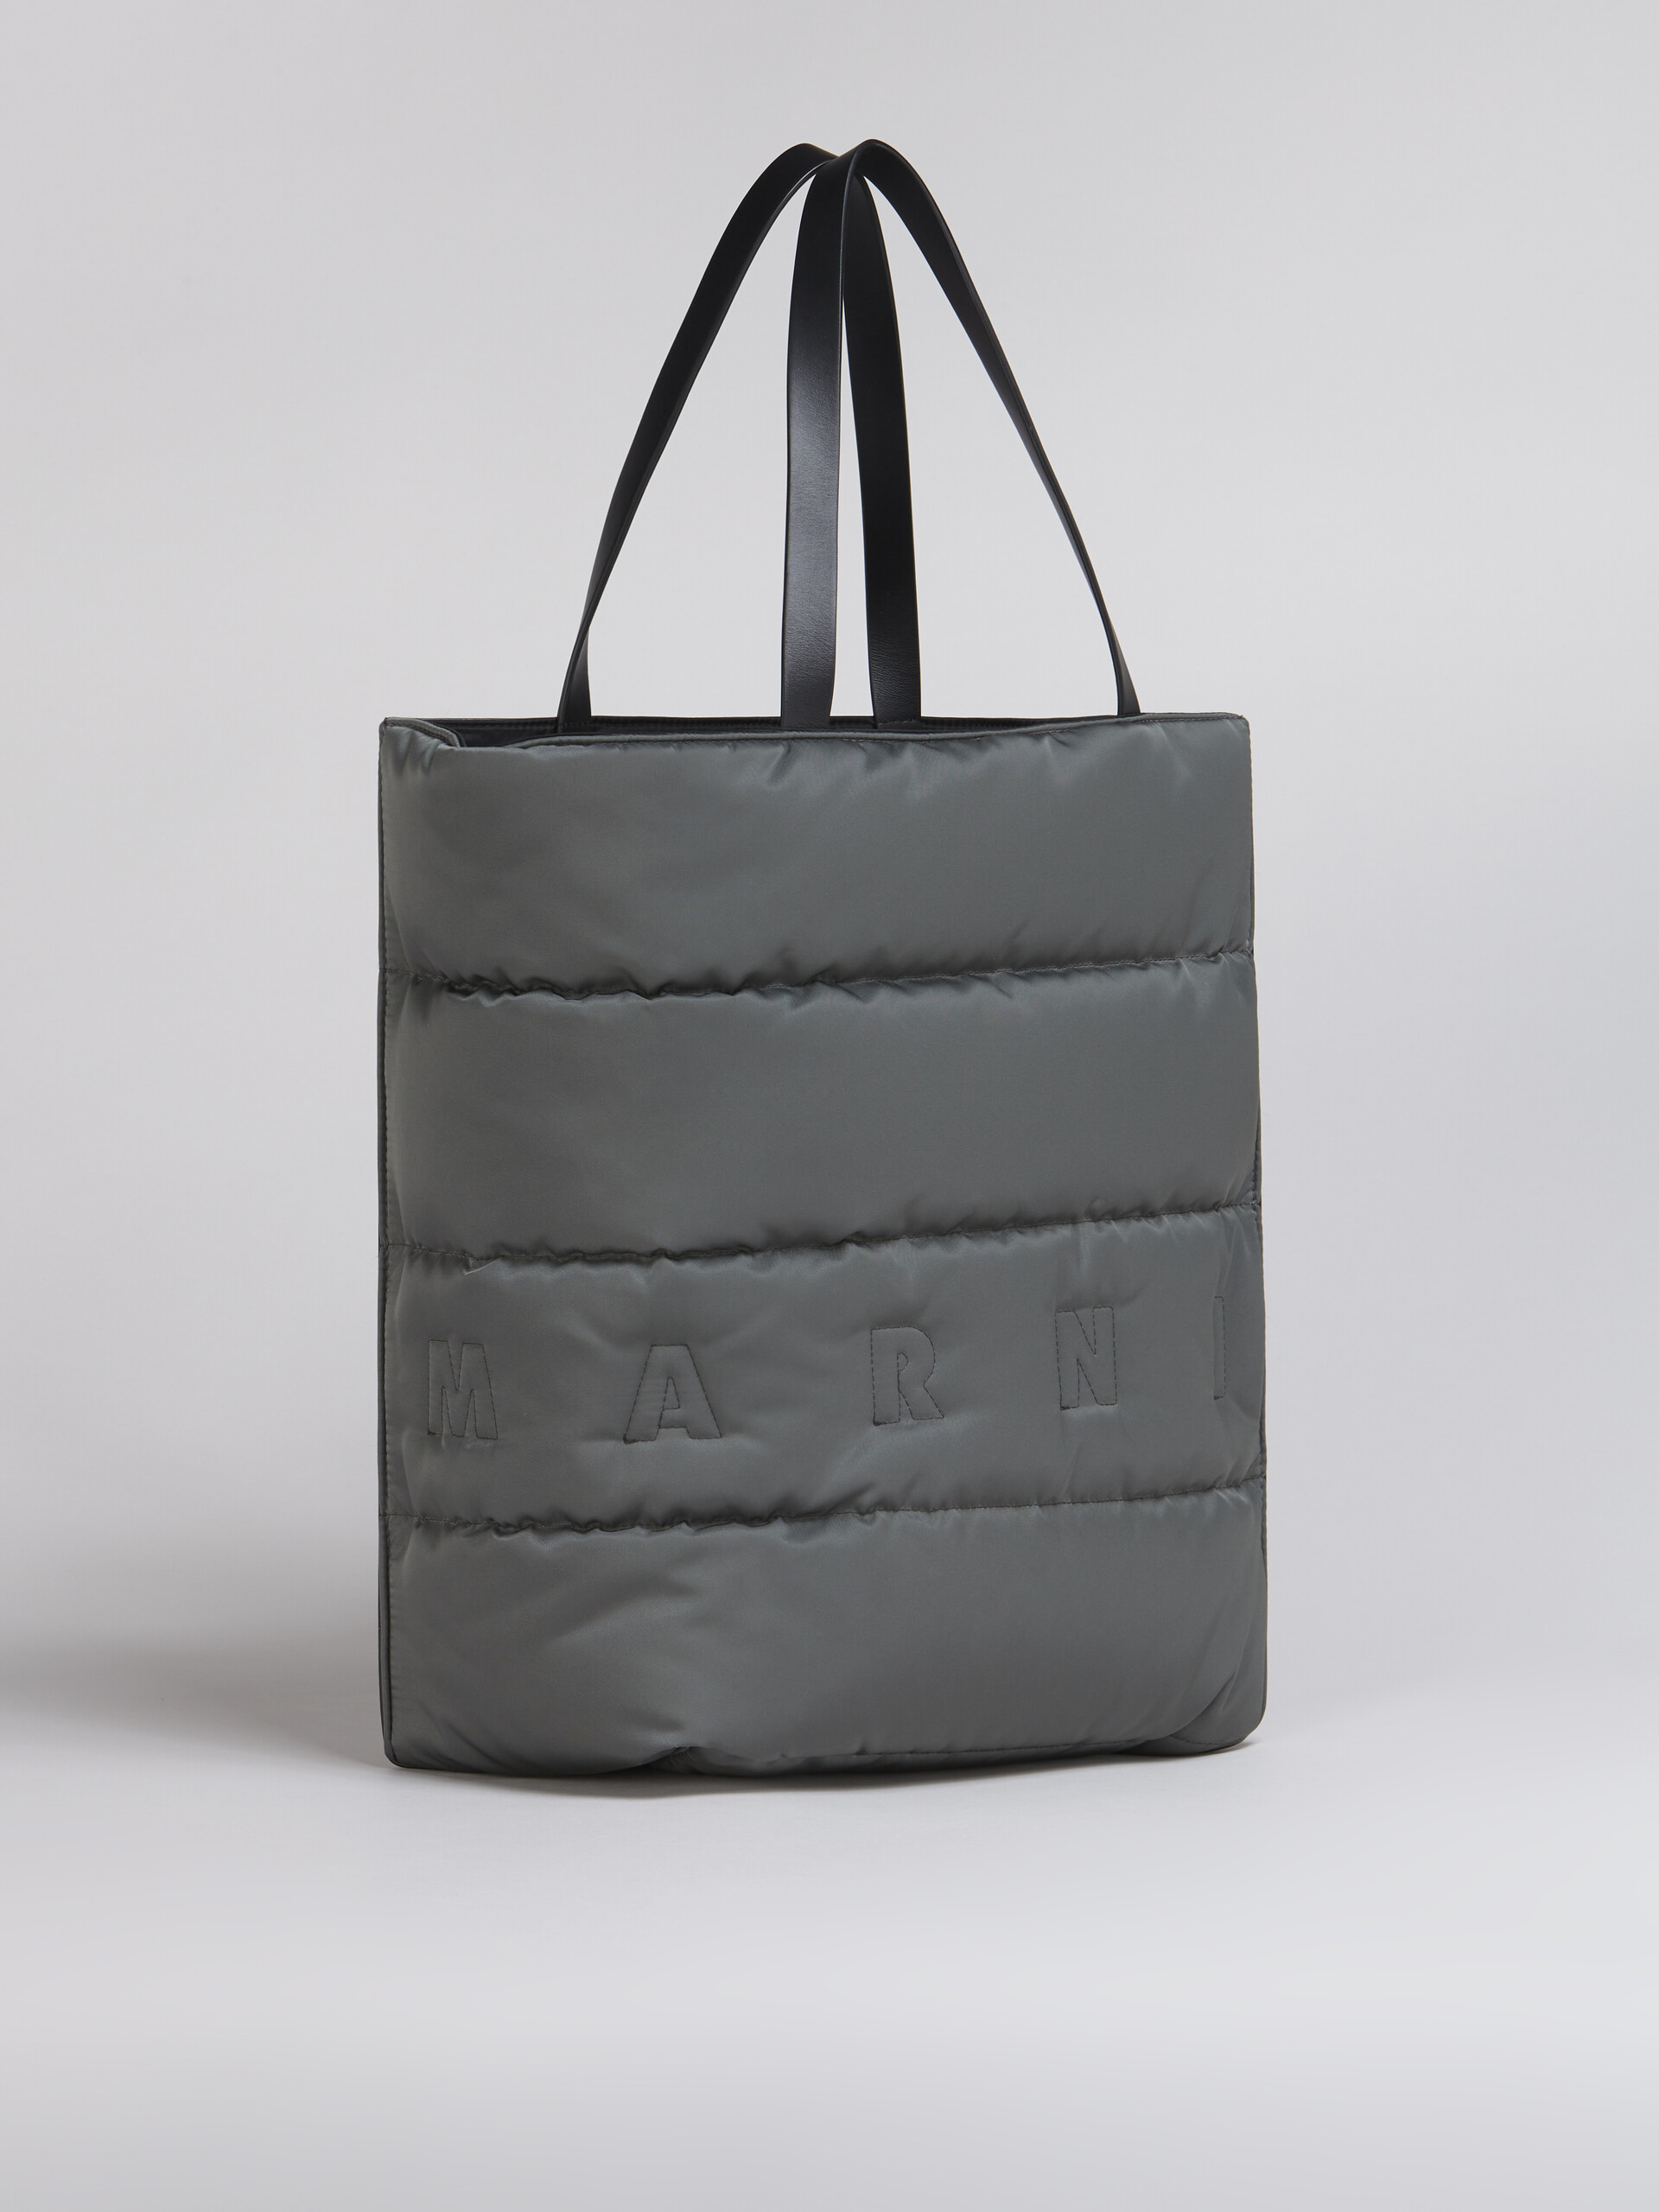 MUSEO large bag in grey nylon - Shopping Bags - Image 6